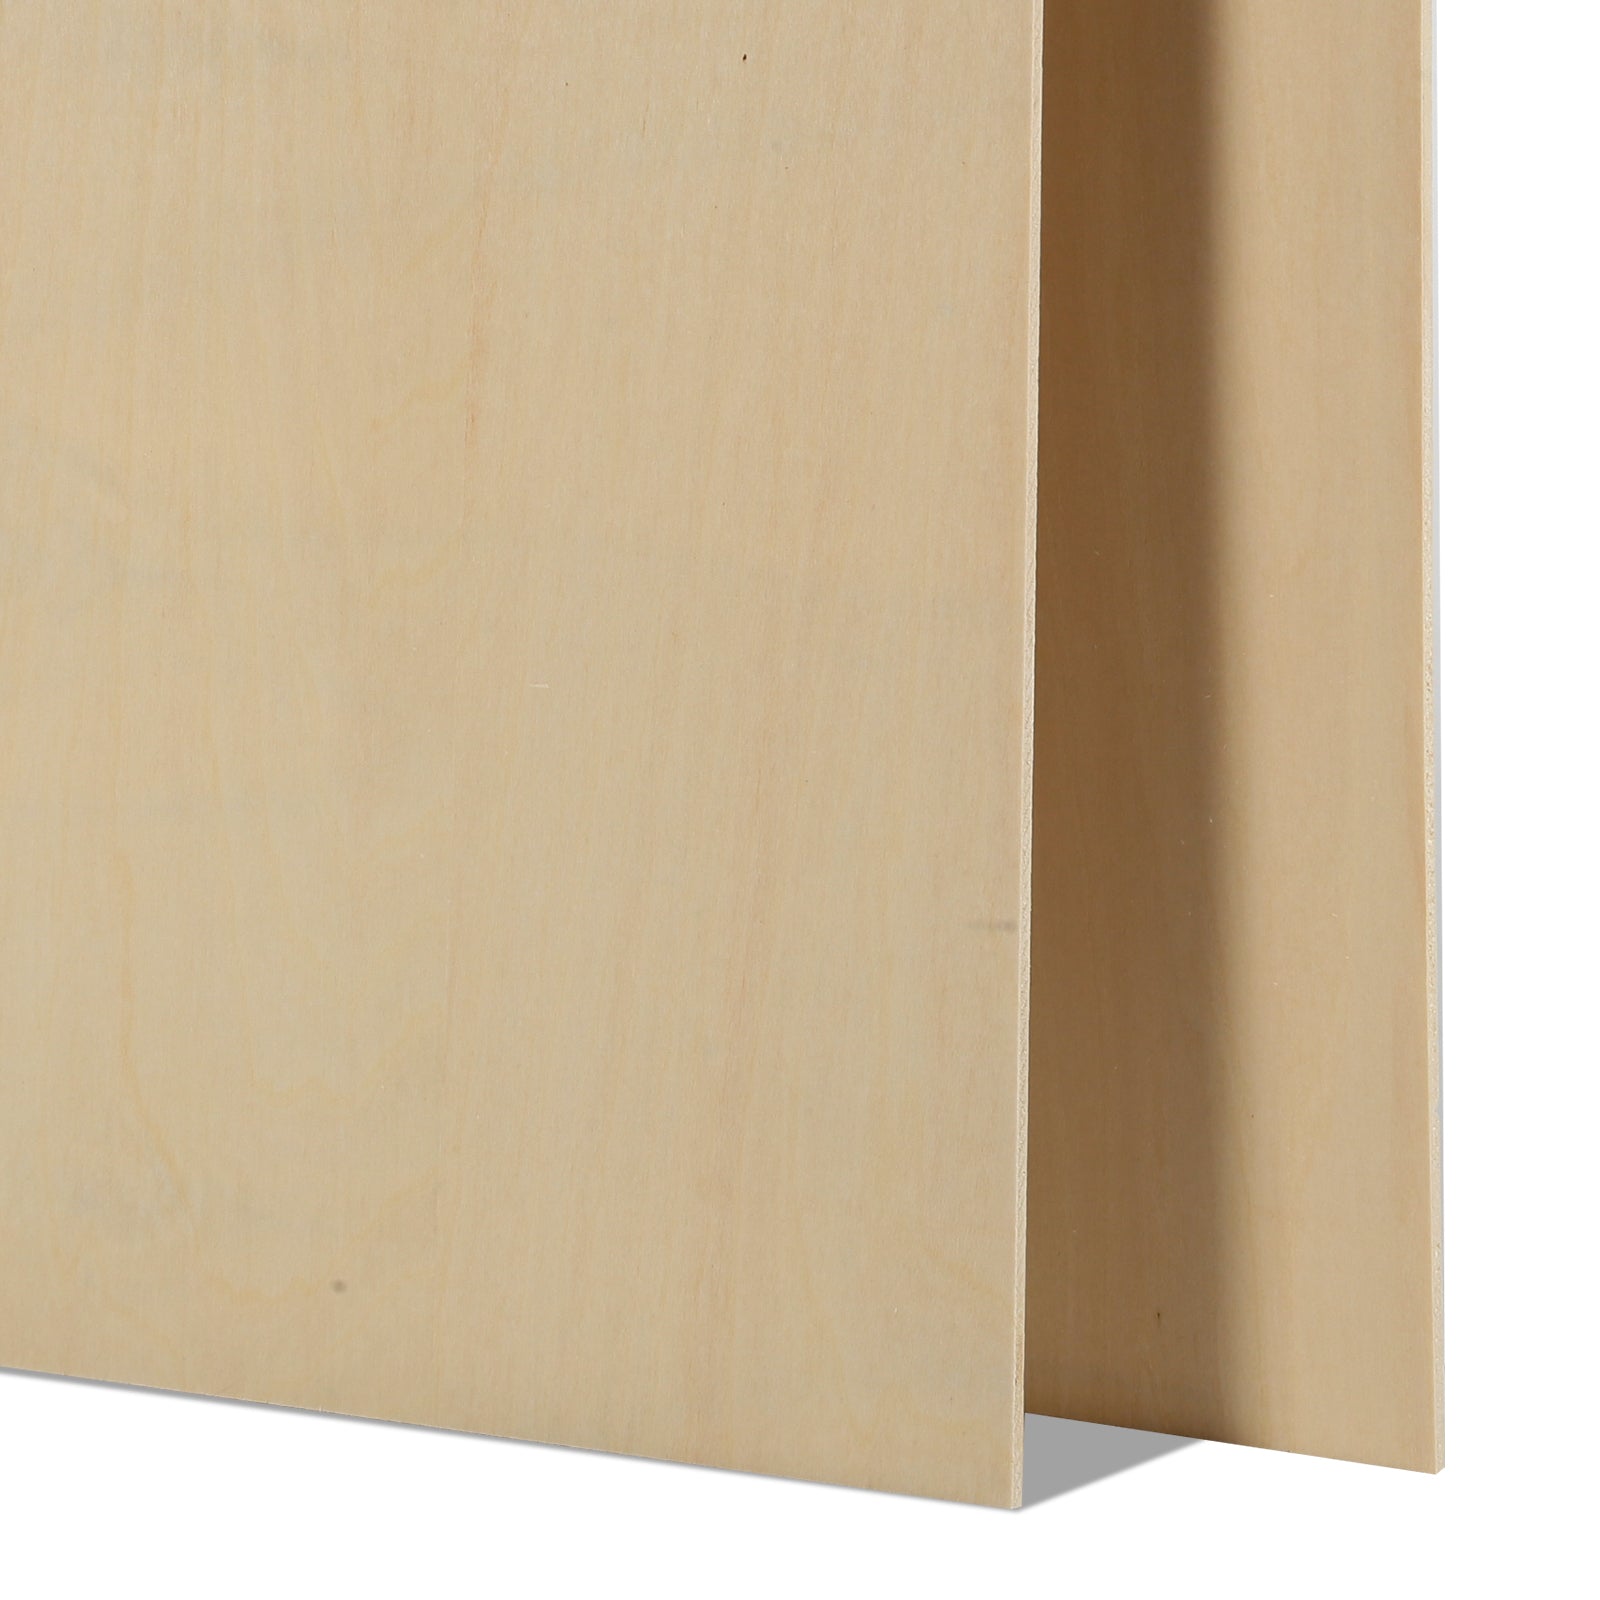 1/8" Thick Basswood Sheets